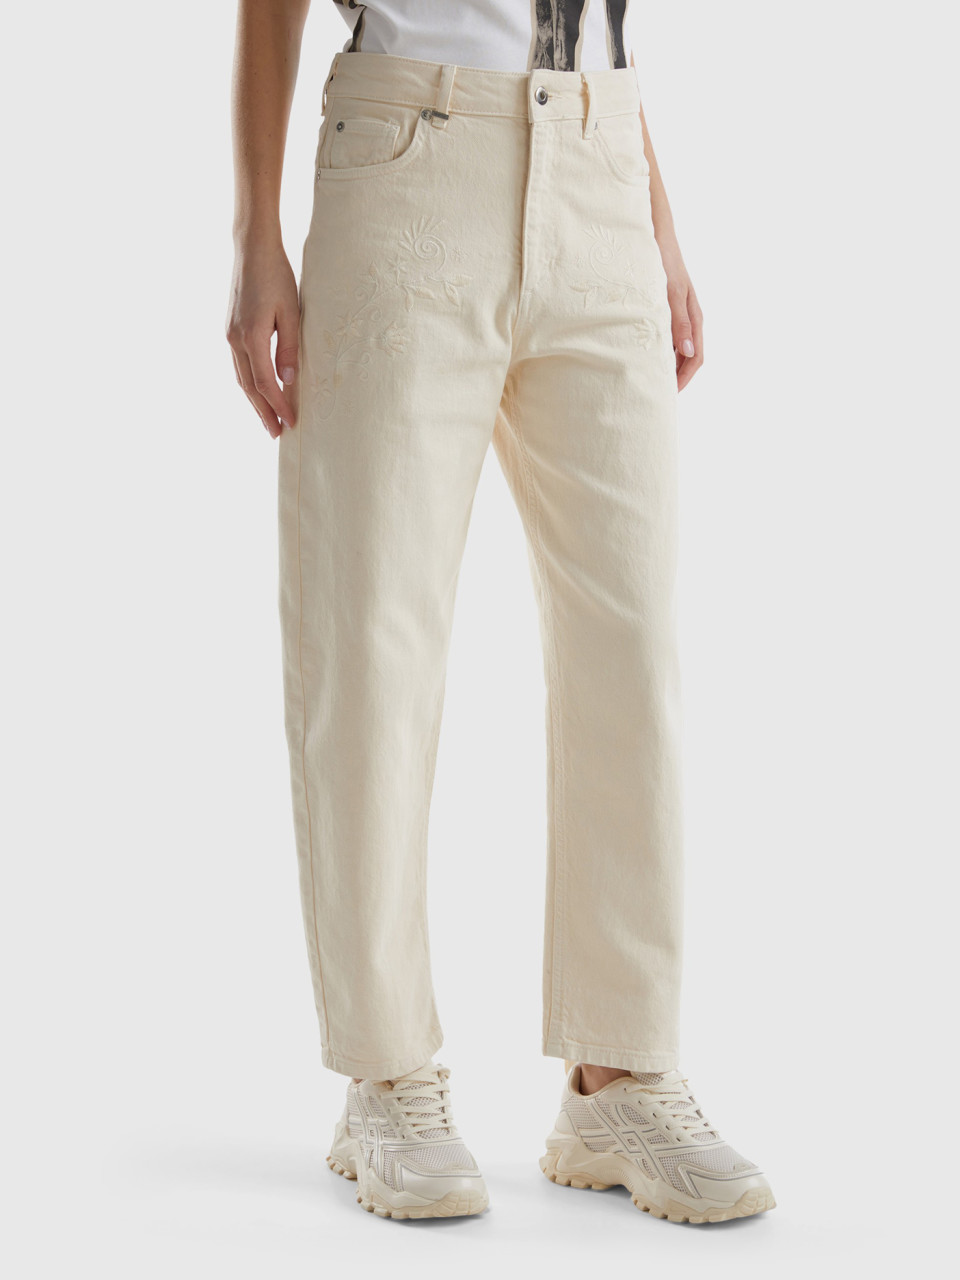 Benetton, Carrot Fit Trousers With Floral Embroidery, Creamy White, Women